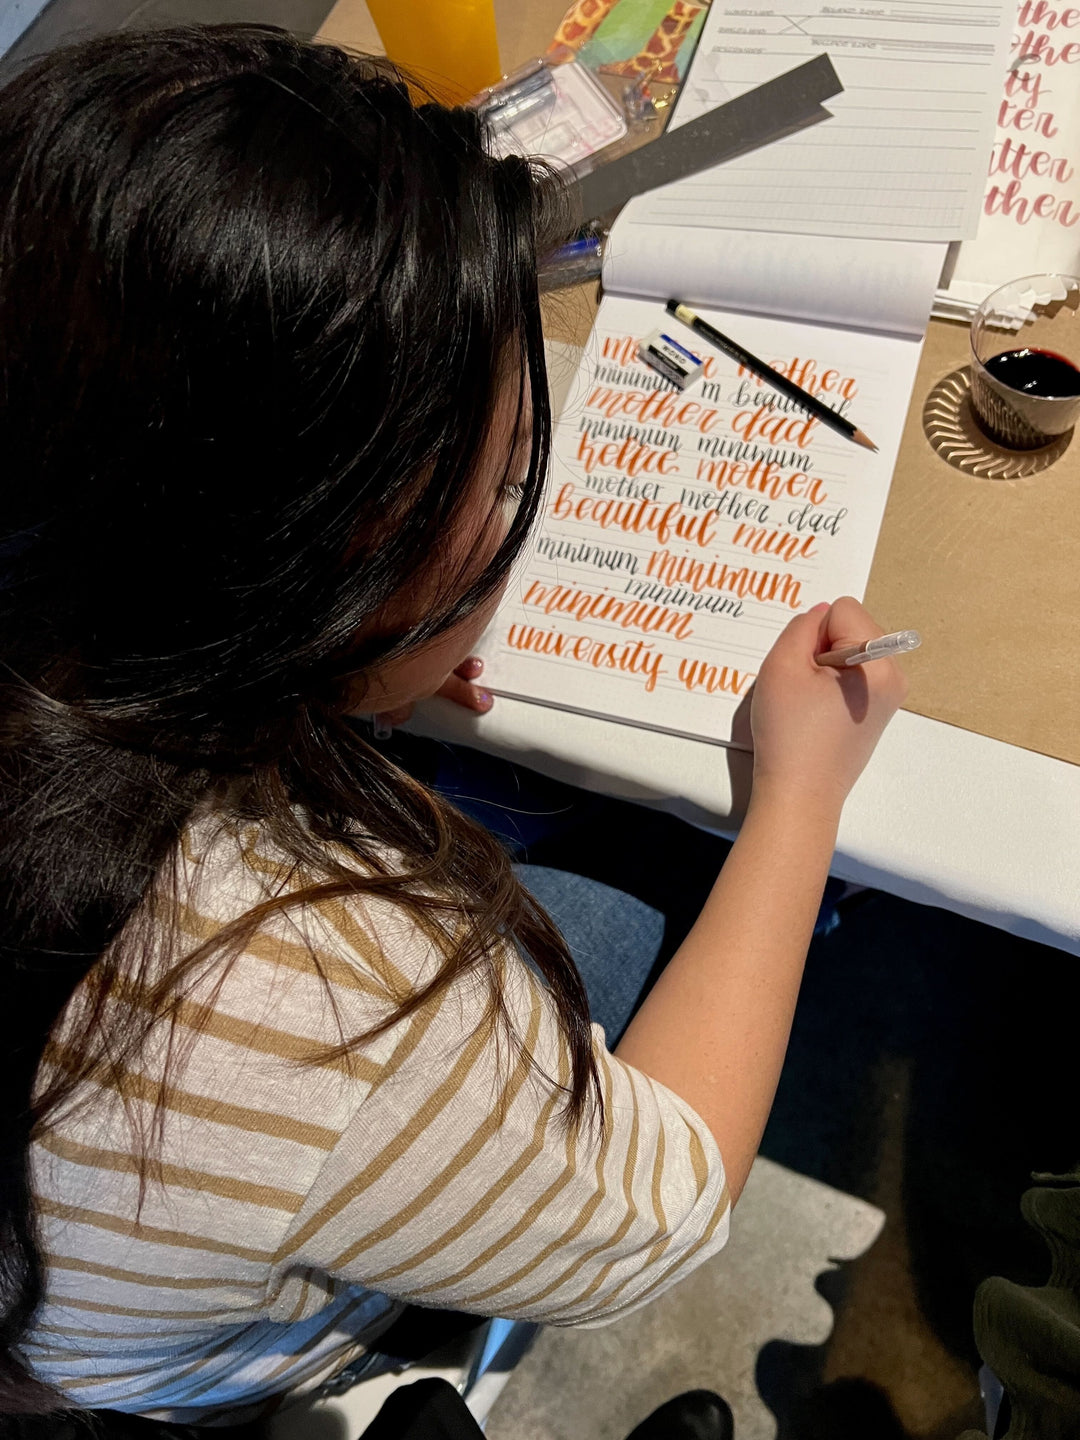 Originals Paper Art Workshop Brush Lettering Three Week Course in Gig Harbor - September 16, 23, 30 from 10am-12:30pm